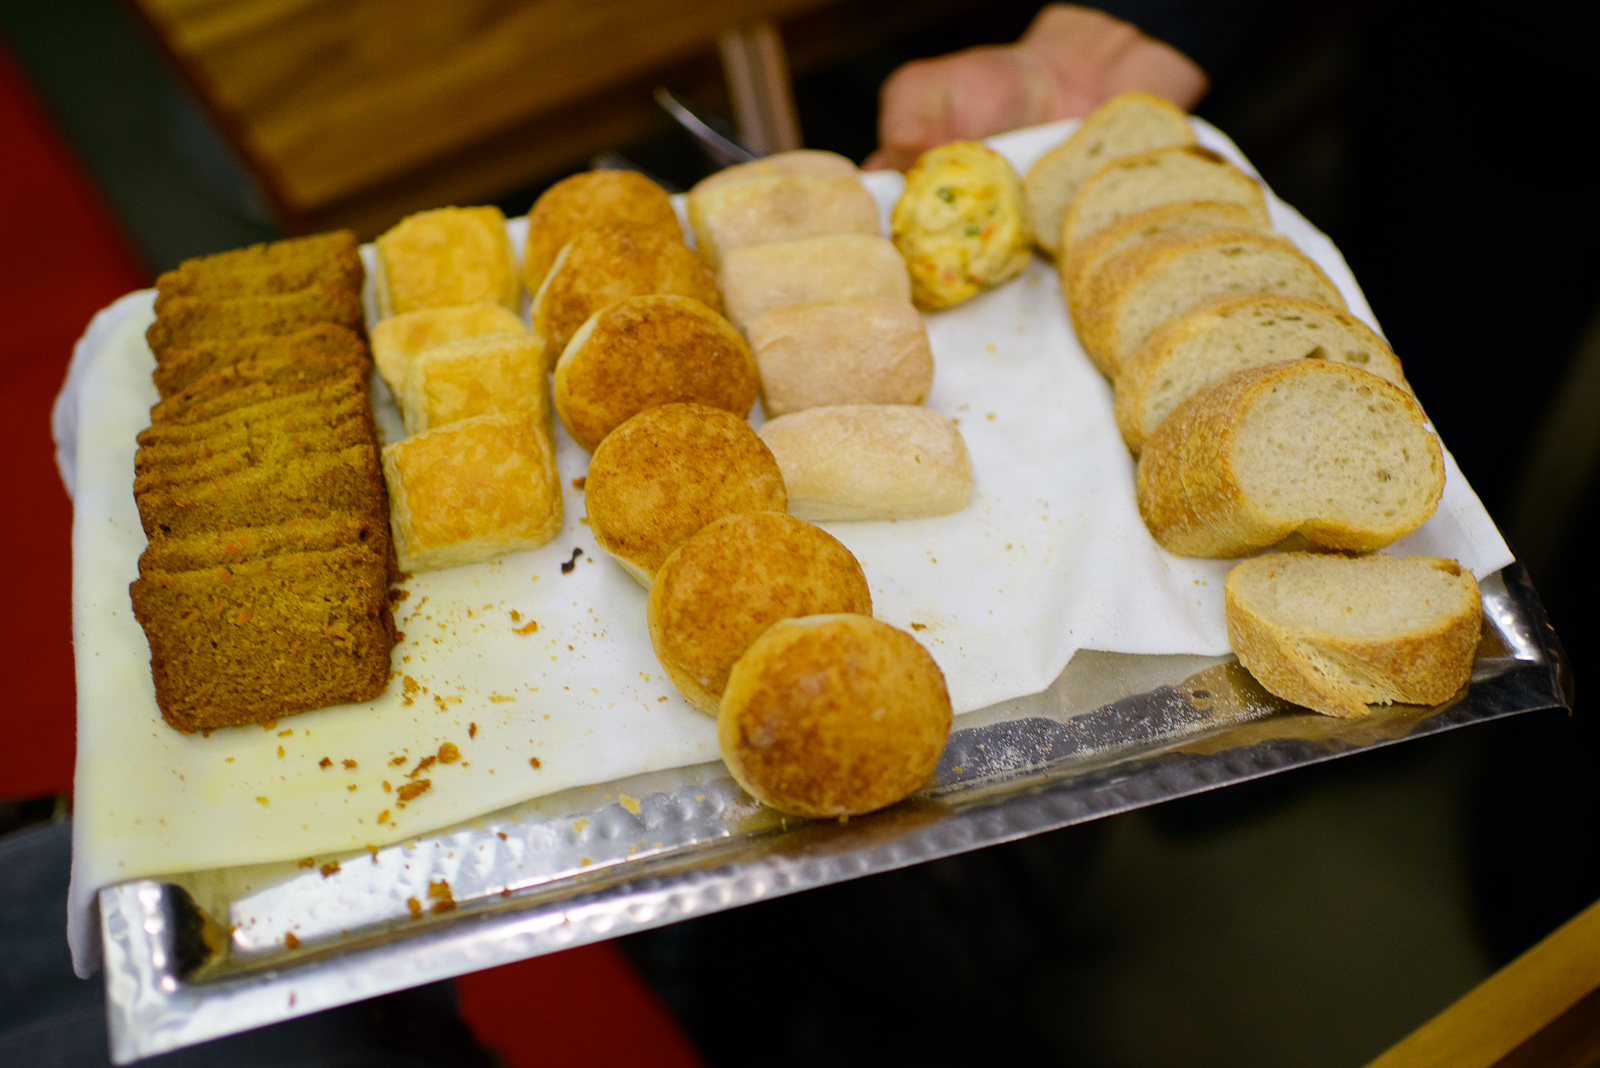 Selection of breads